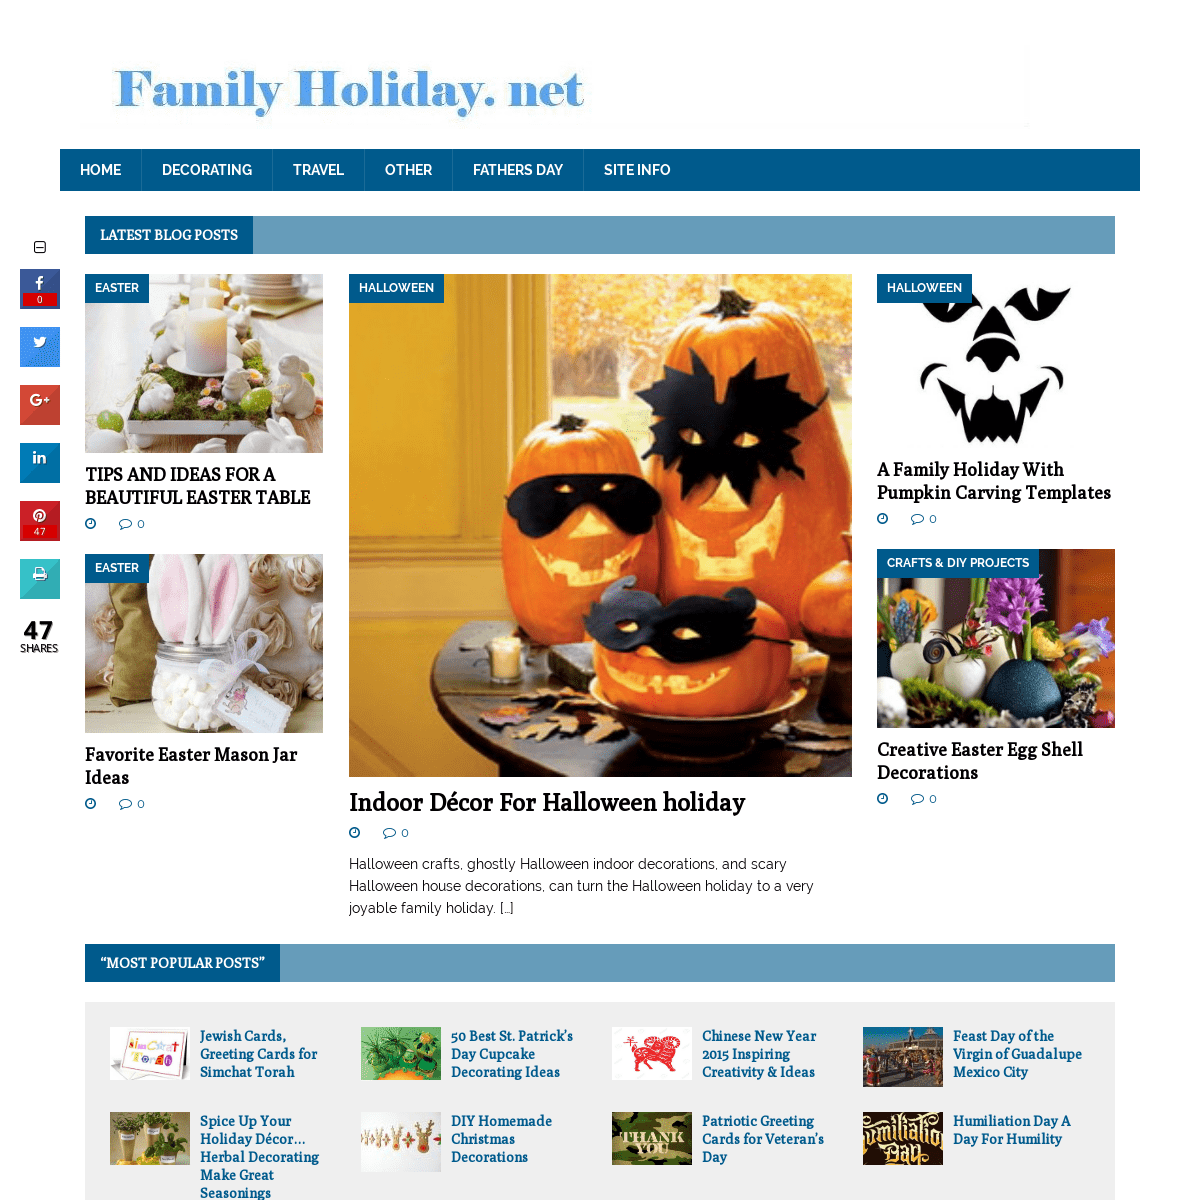 Home - family holiday.net/guide to family holidays on the internet